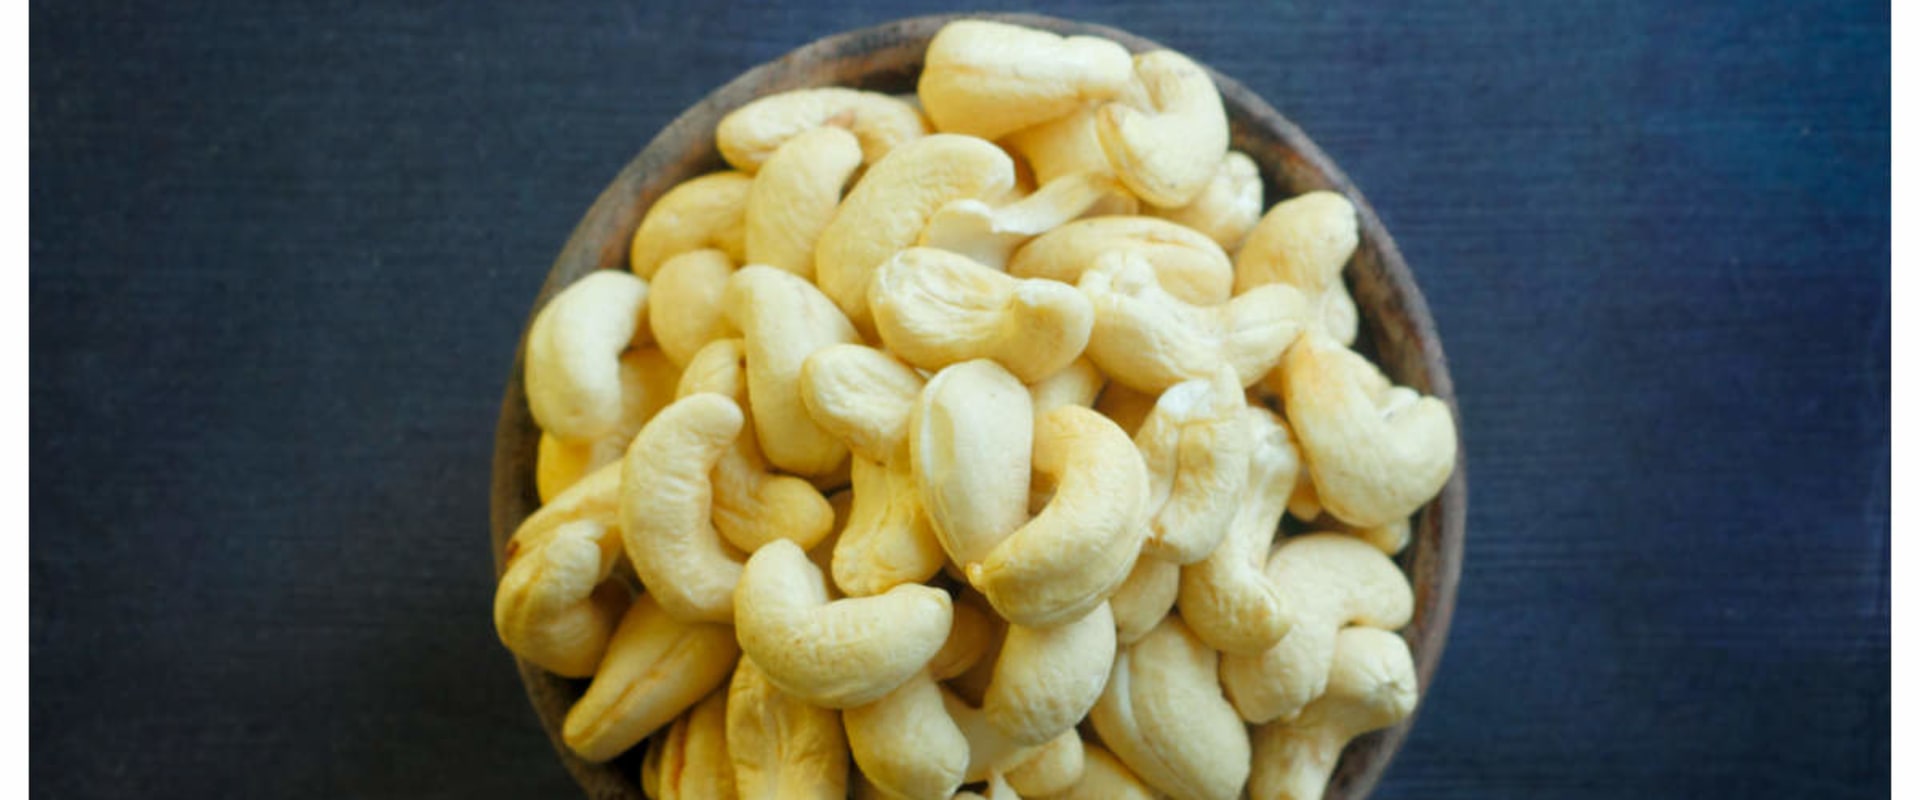 Why cashew nuts are so expensive?